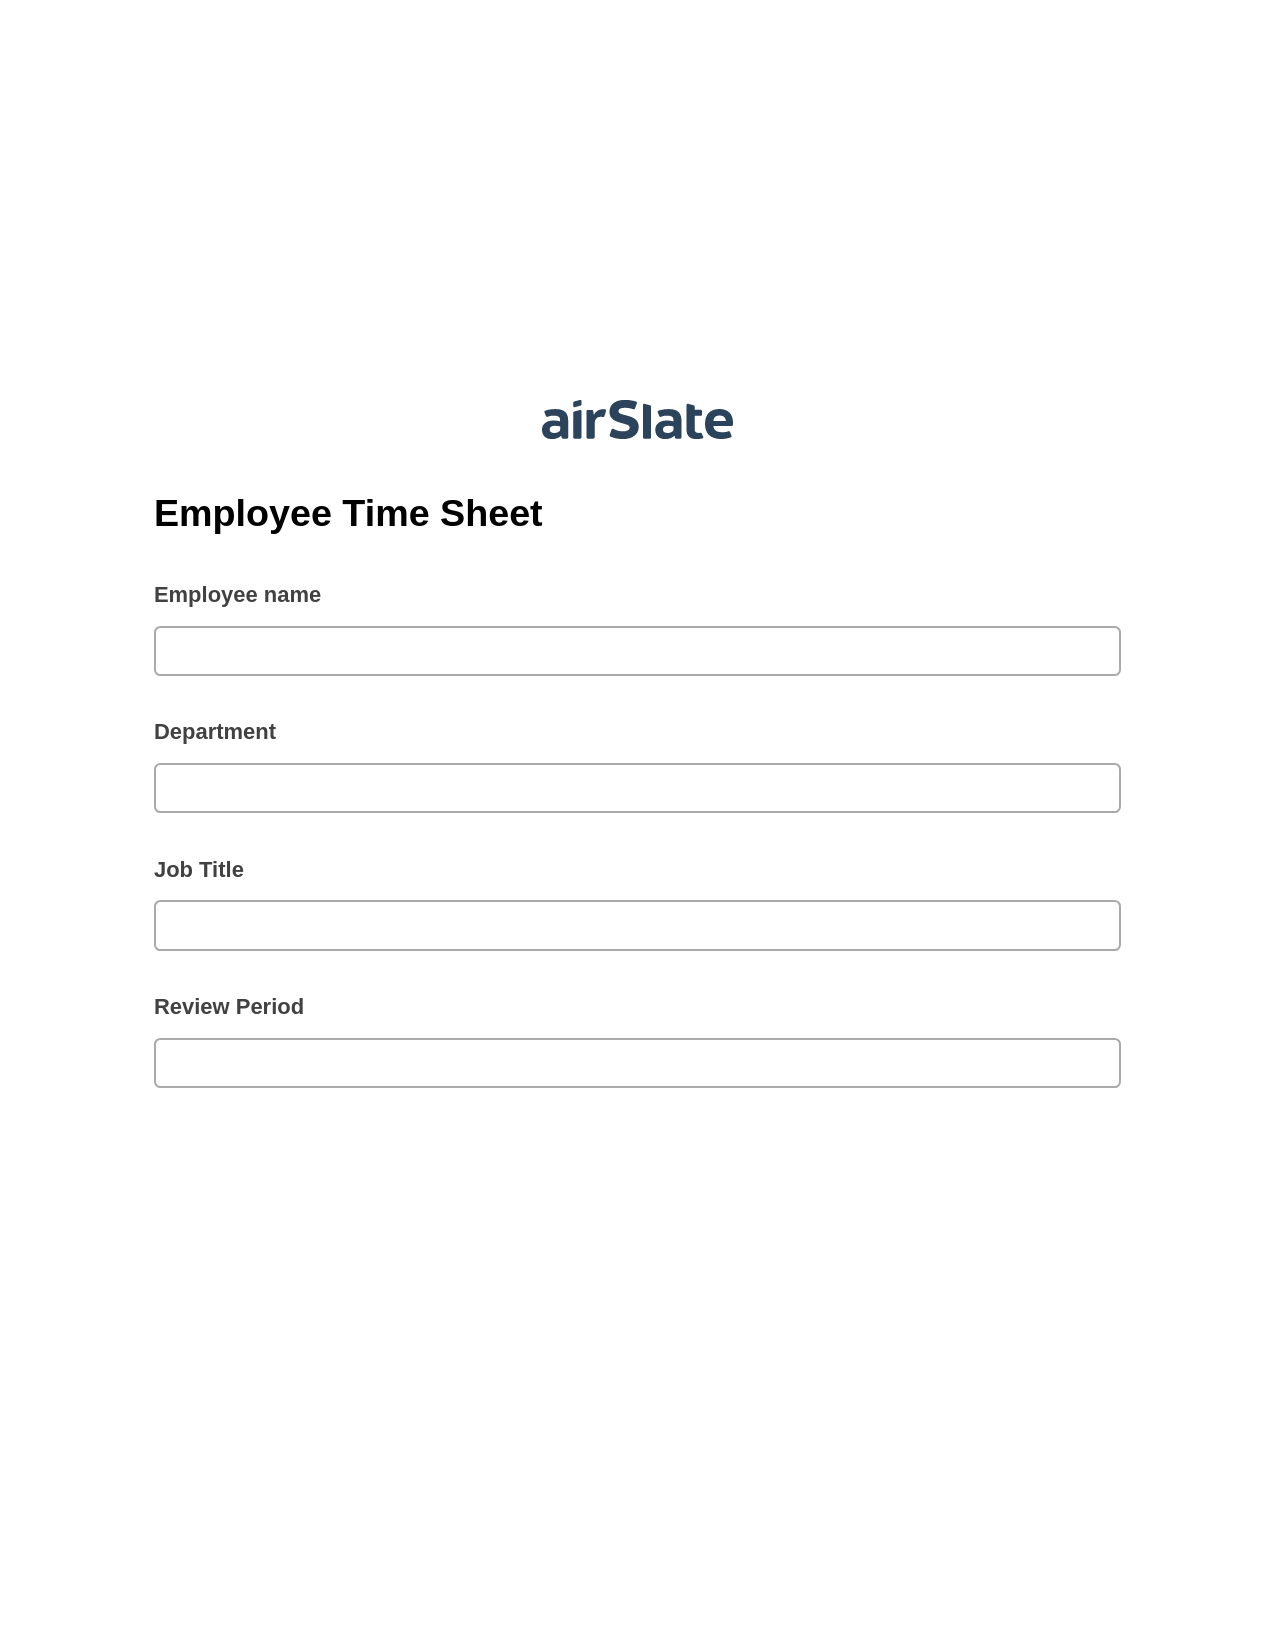 Employee Time Sheet Pre-fill from Excel Spreadsheet Bot, Create Salesforce Records Bot, Webhook Postfinish Bot